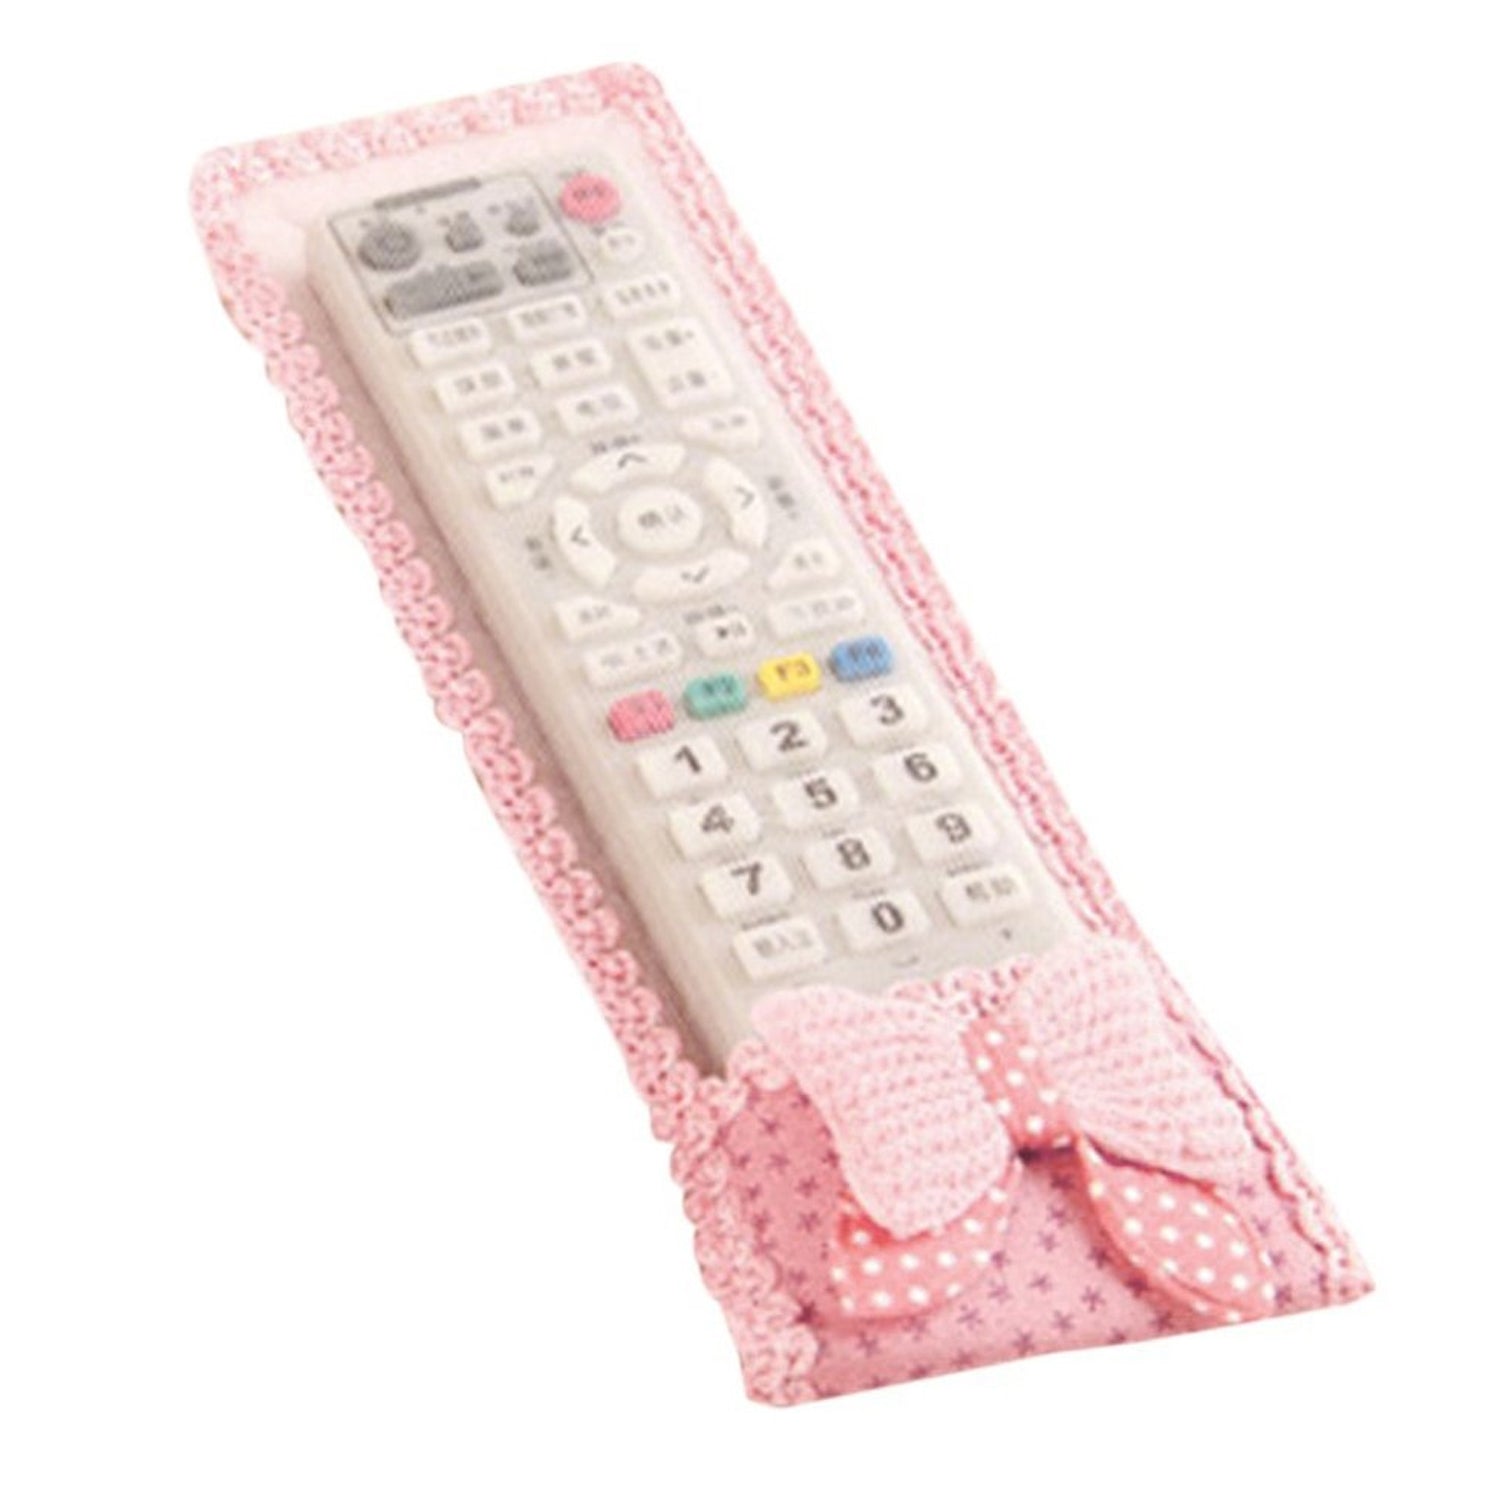 7638 3pc Remote Cover with Bow Knot for TV, Air Conditioner, D2H, DTH Remote Control Dust Cover DeoDap